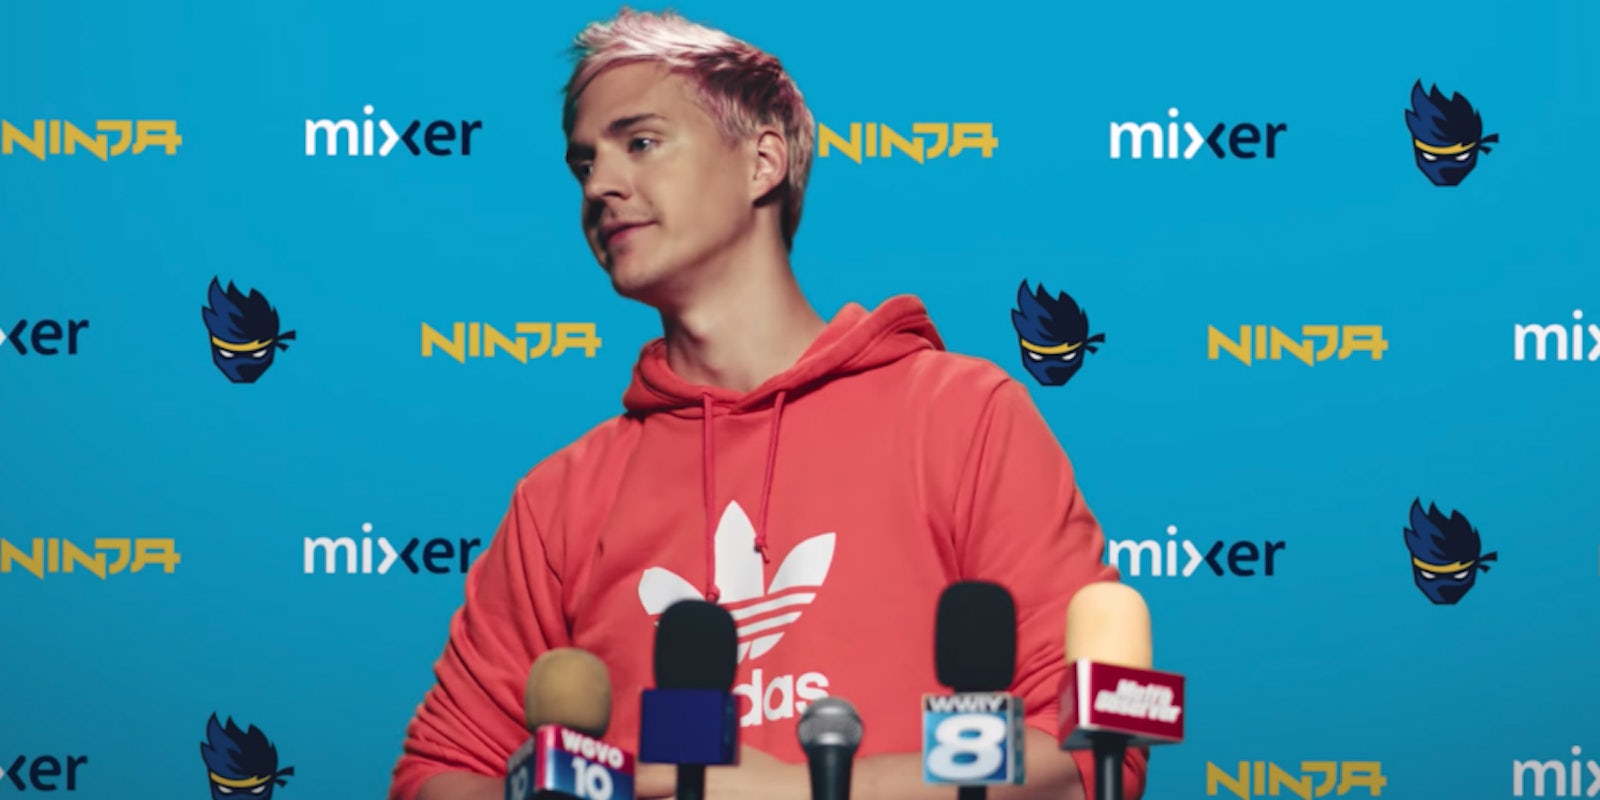 ninja is leaving twitch for mixer